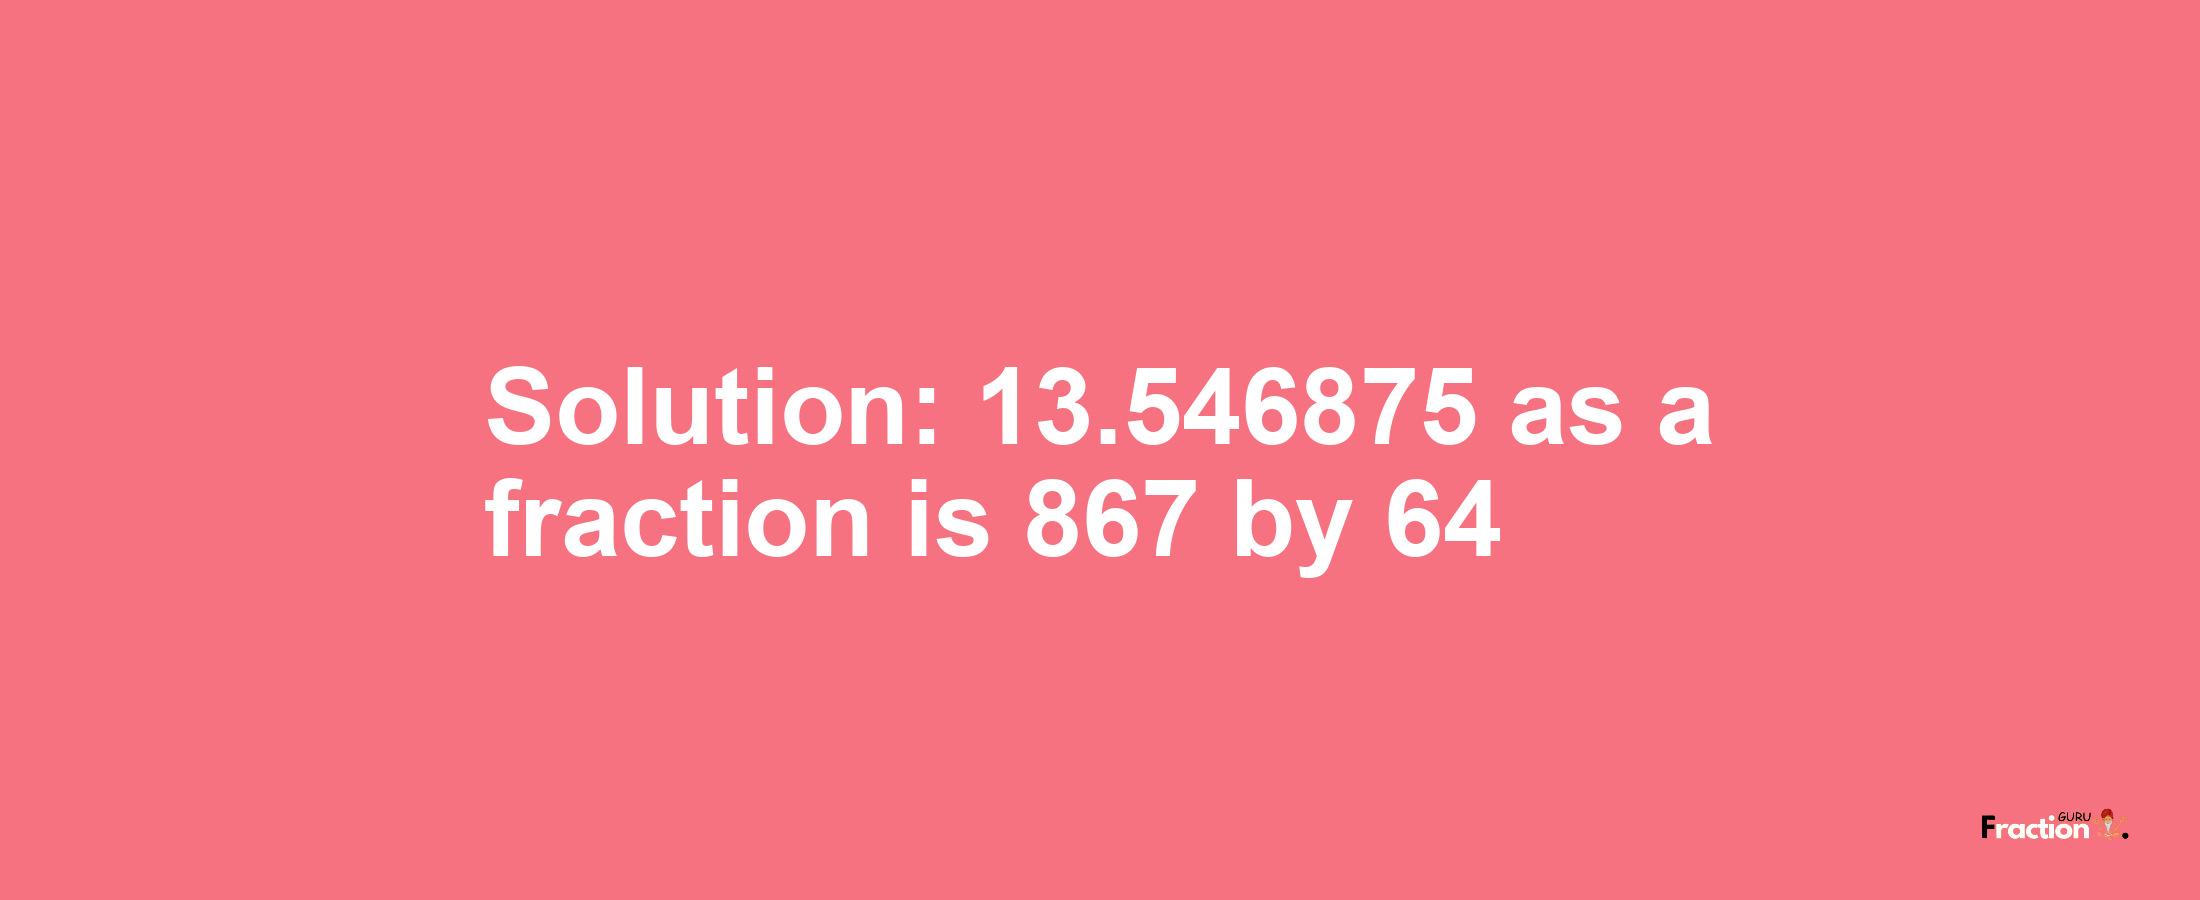 Solution:13.546875 as a fraction is 867/64